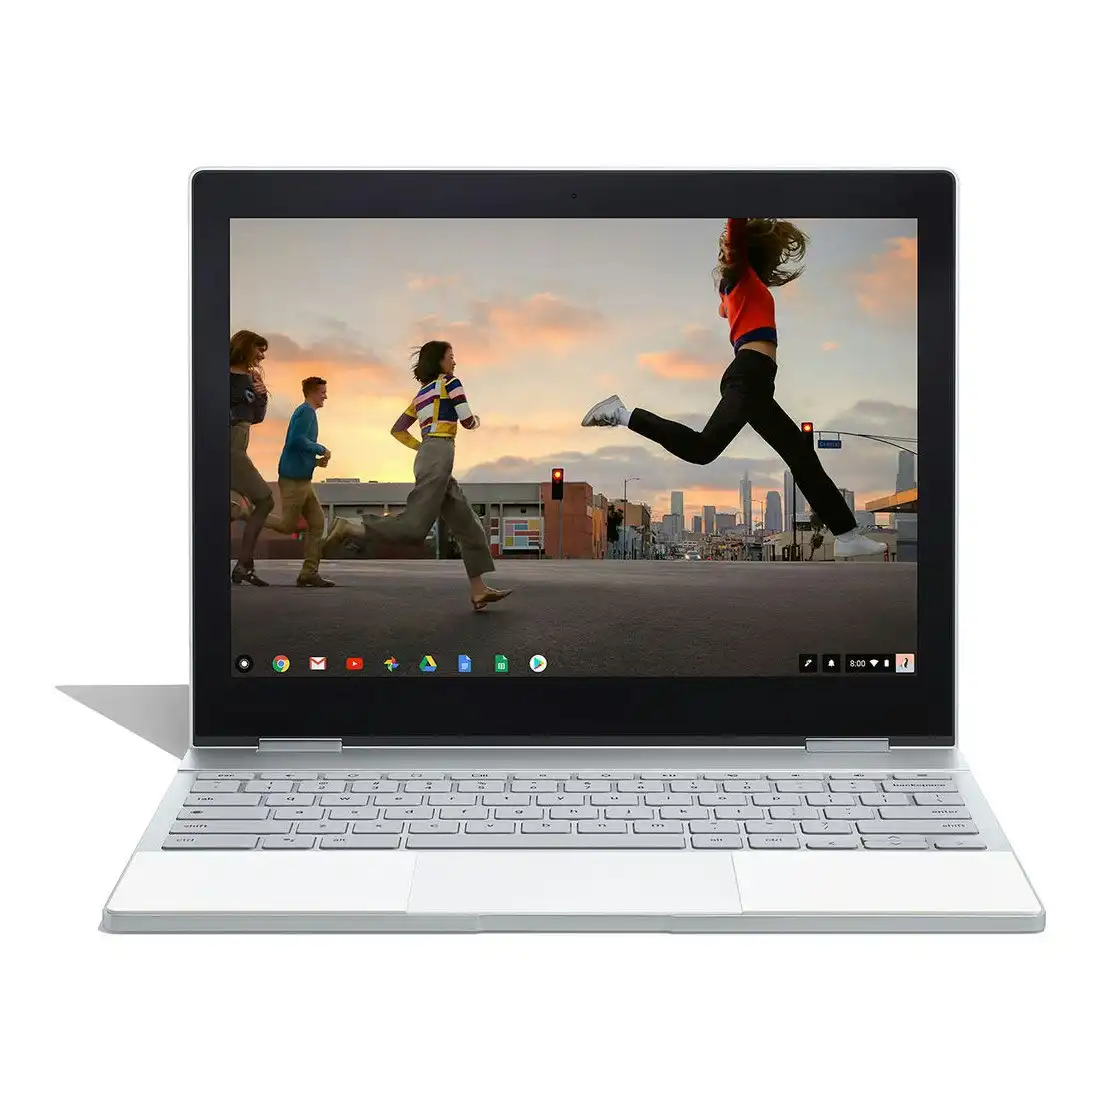 Google Pixelbook Touchscreen 2-in-1 Chromebook (i7, 512GB/16GB, Global Version) Silver [Refurbished] - Excellent